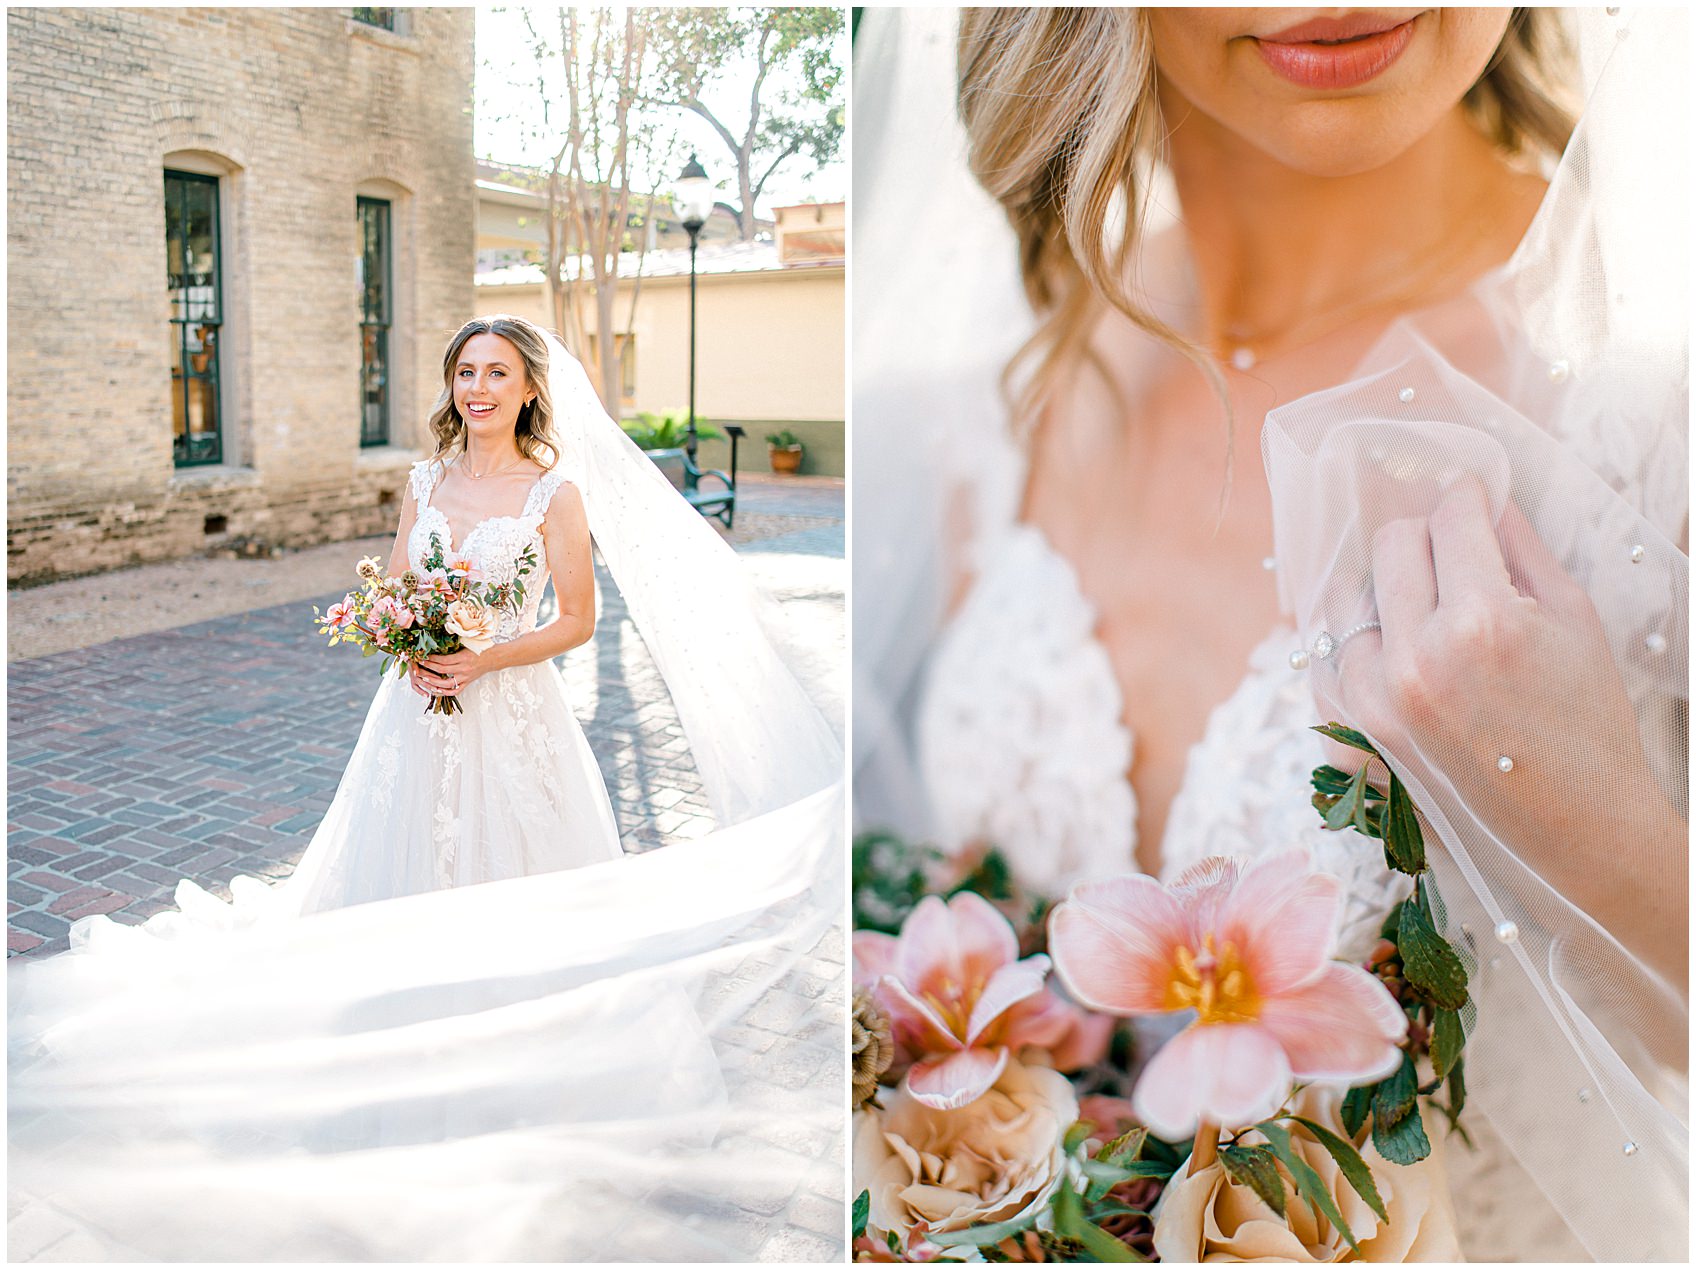 Downtown San Antonio Bridal Photography Session by Allison Jeffers Wedding Photography 0012